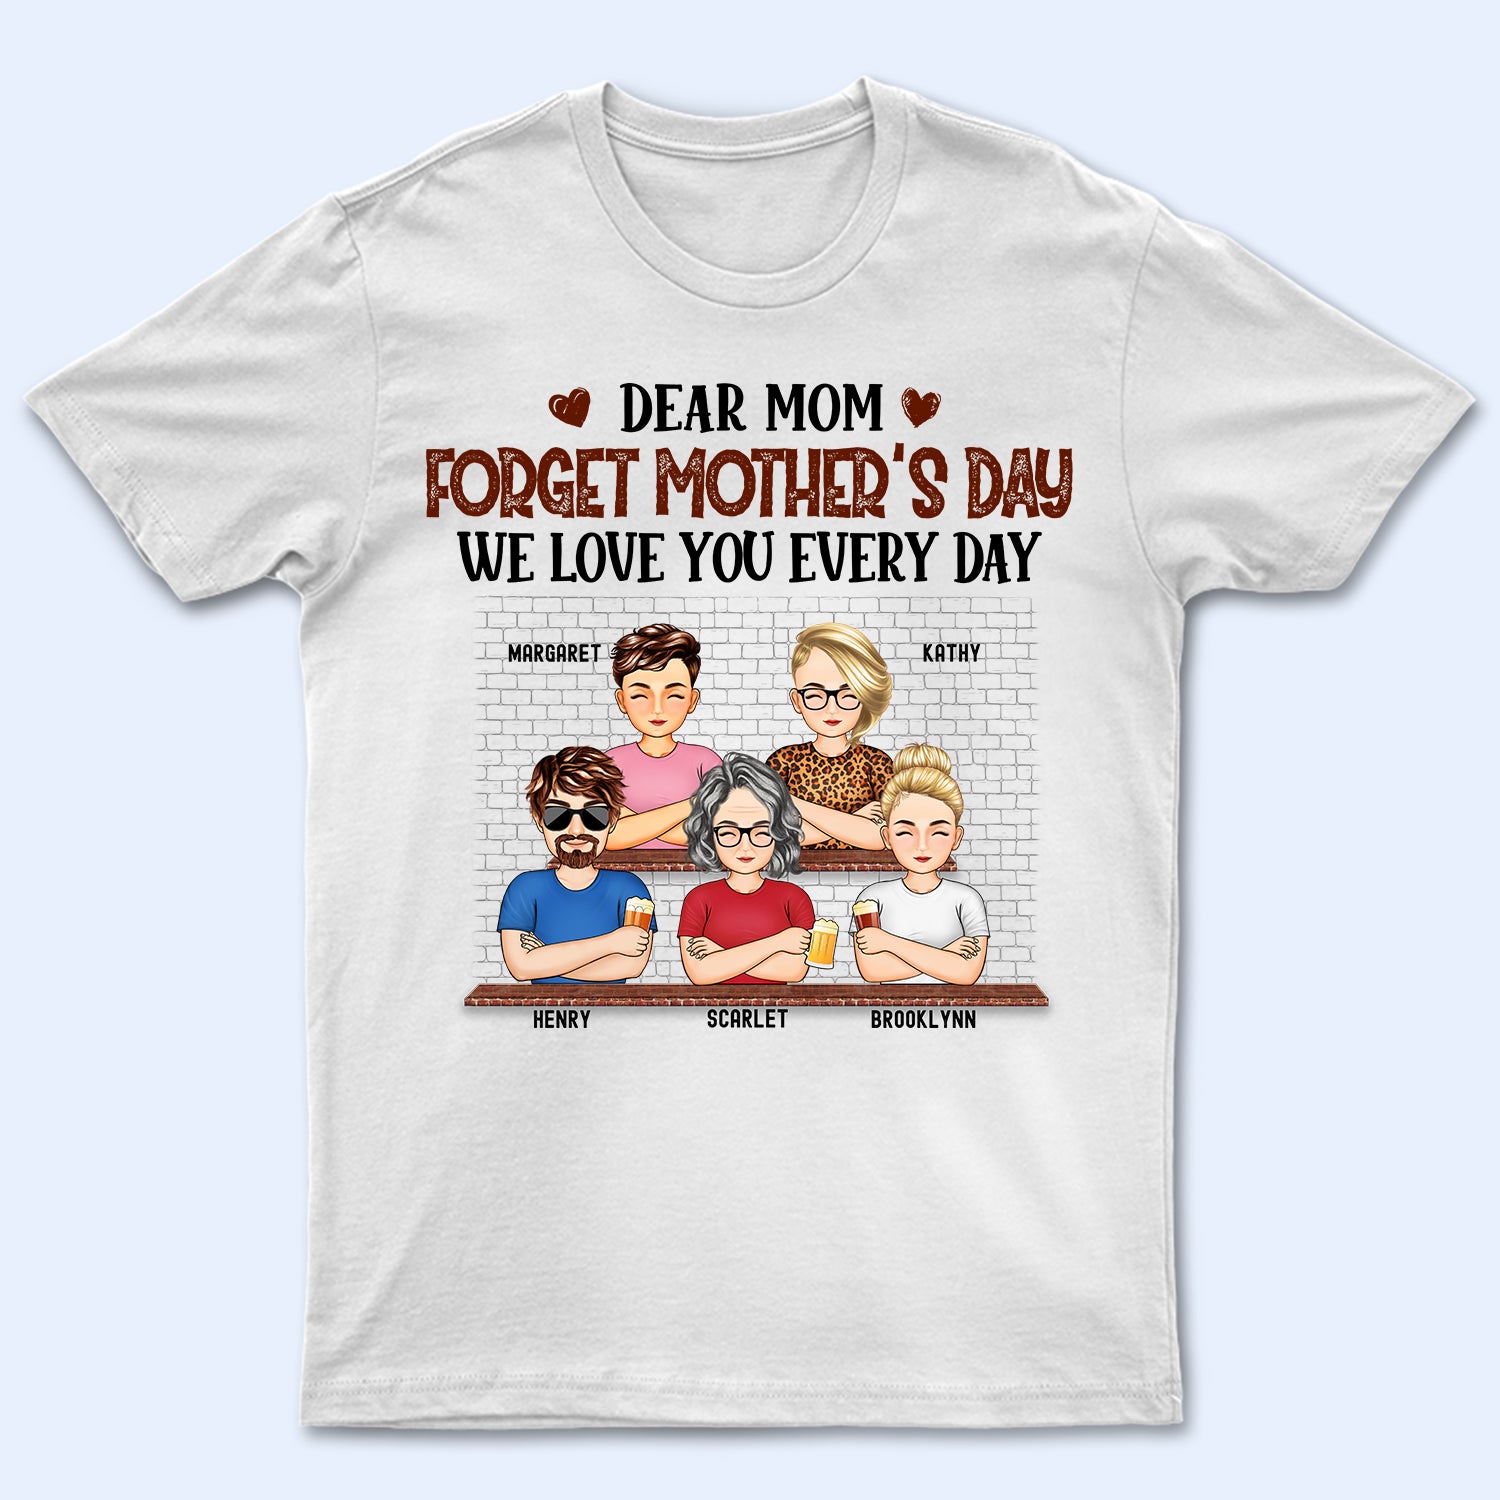 We Love You Every Day - Birthday, Loving Gift For Mommy, Mother, Grandma, Grandmother - Personalized Custom T Shirt